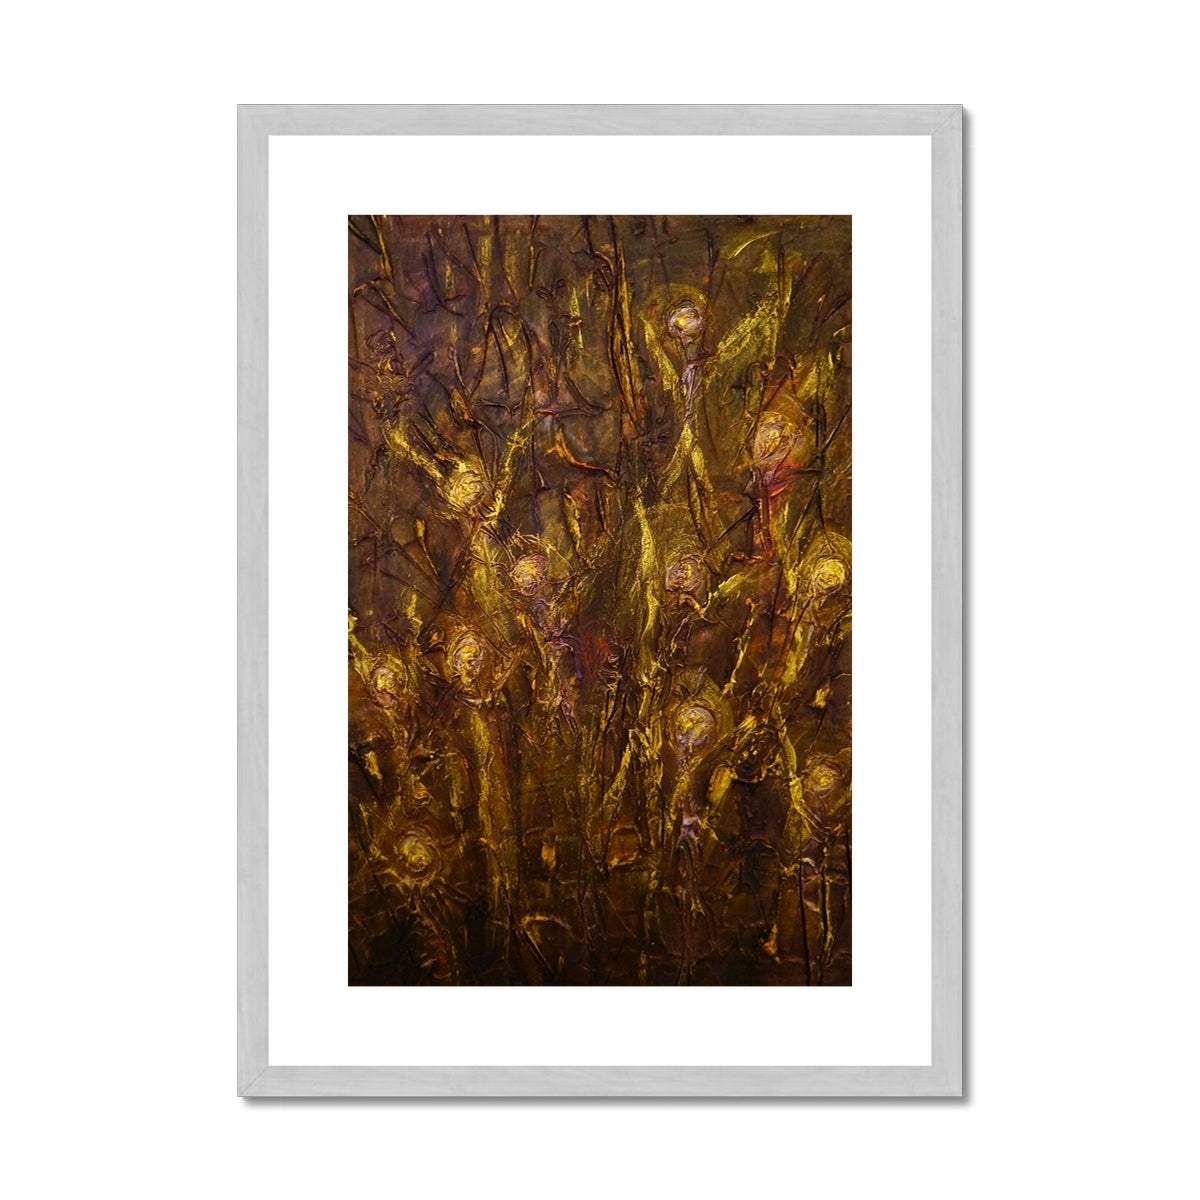 Tam O Shanter Witches Painting | Antique Framed & Mounted Prints From Scotland-Antique Framed & Mounted Prints-Abstract & Impressionistic Art Gallery-A2 Portrait-Silver Frame-Paintings, Prints, Homeware, Art Gifts From Scotland By Scottish Artist Kevin Hunter